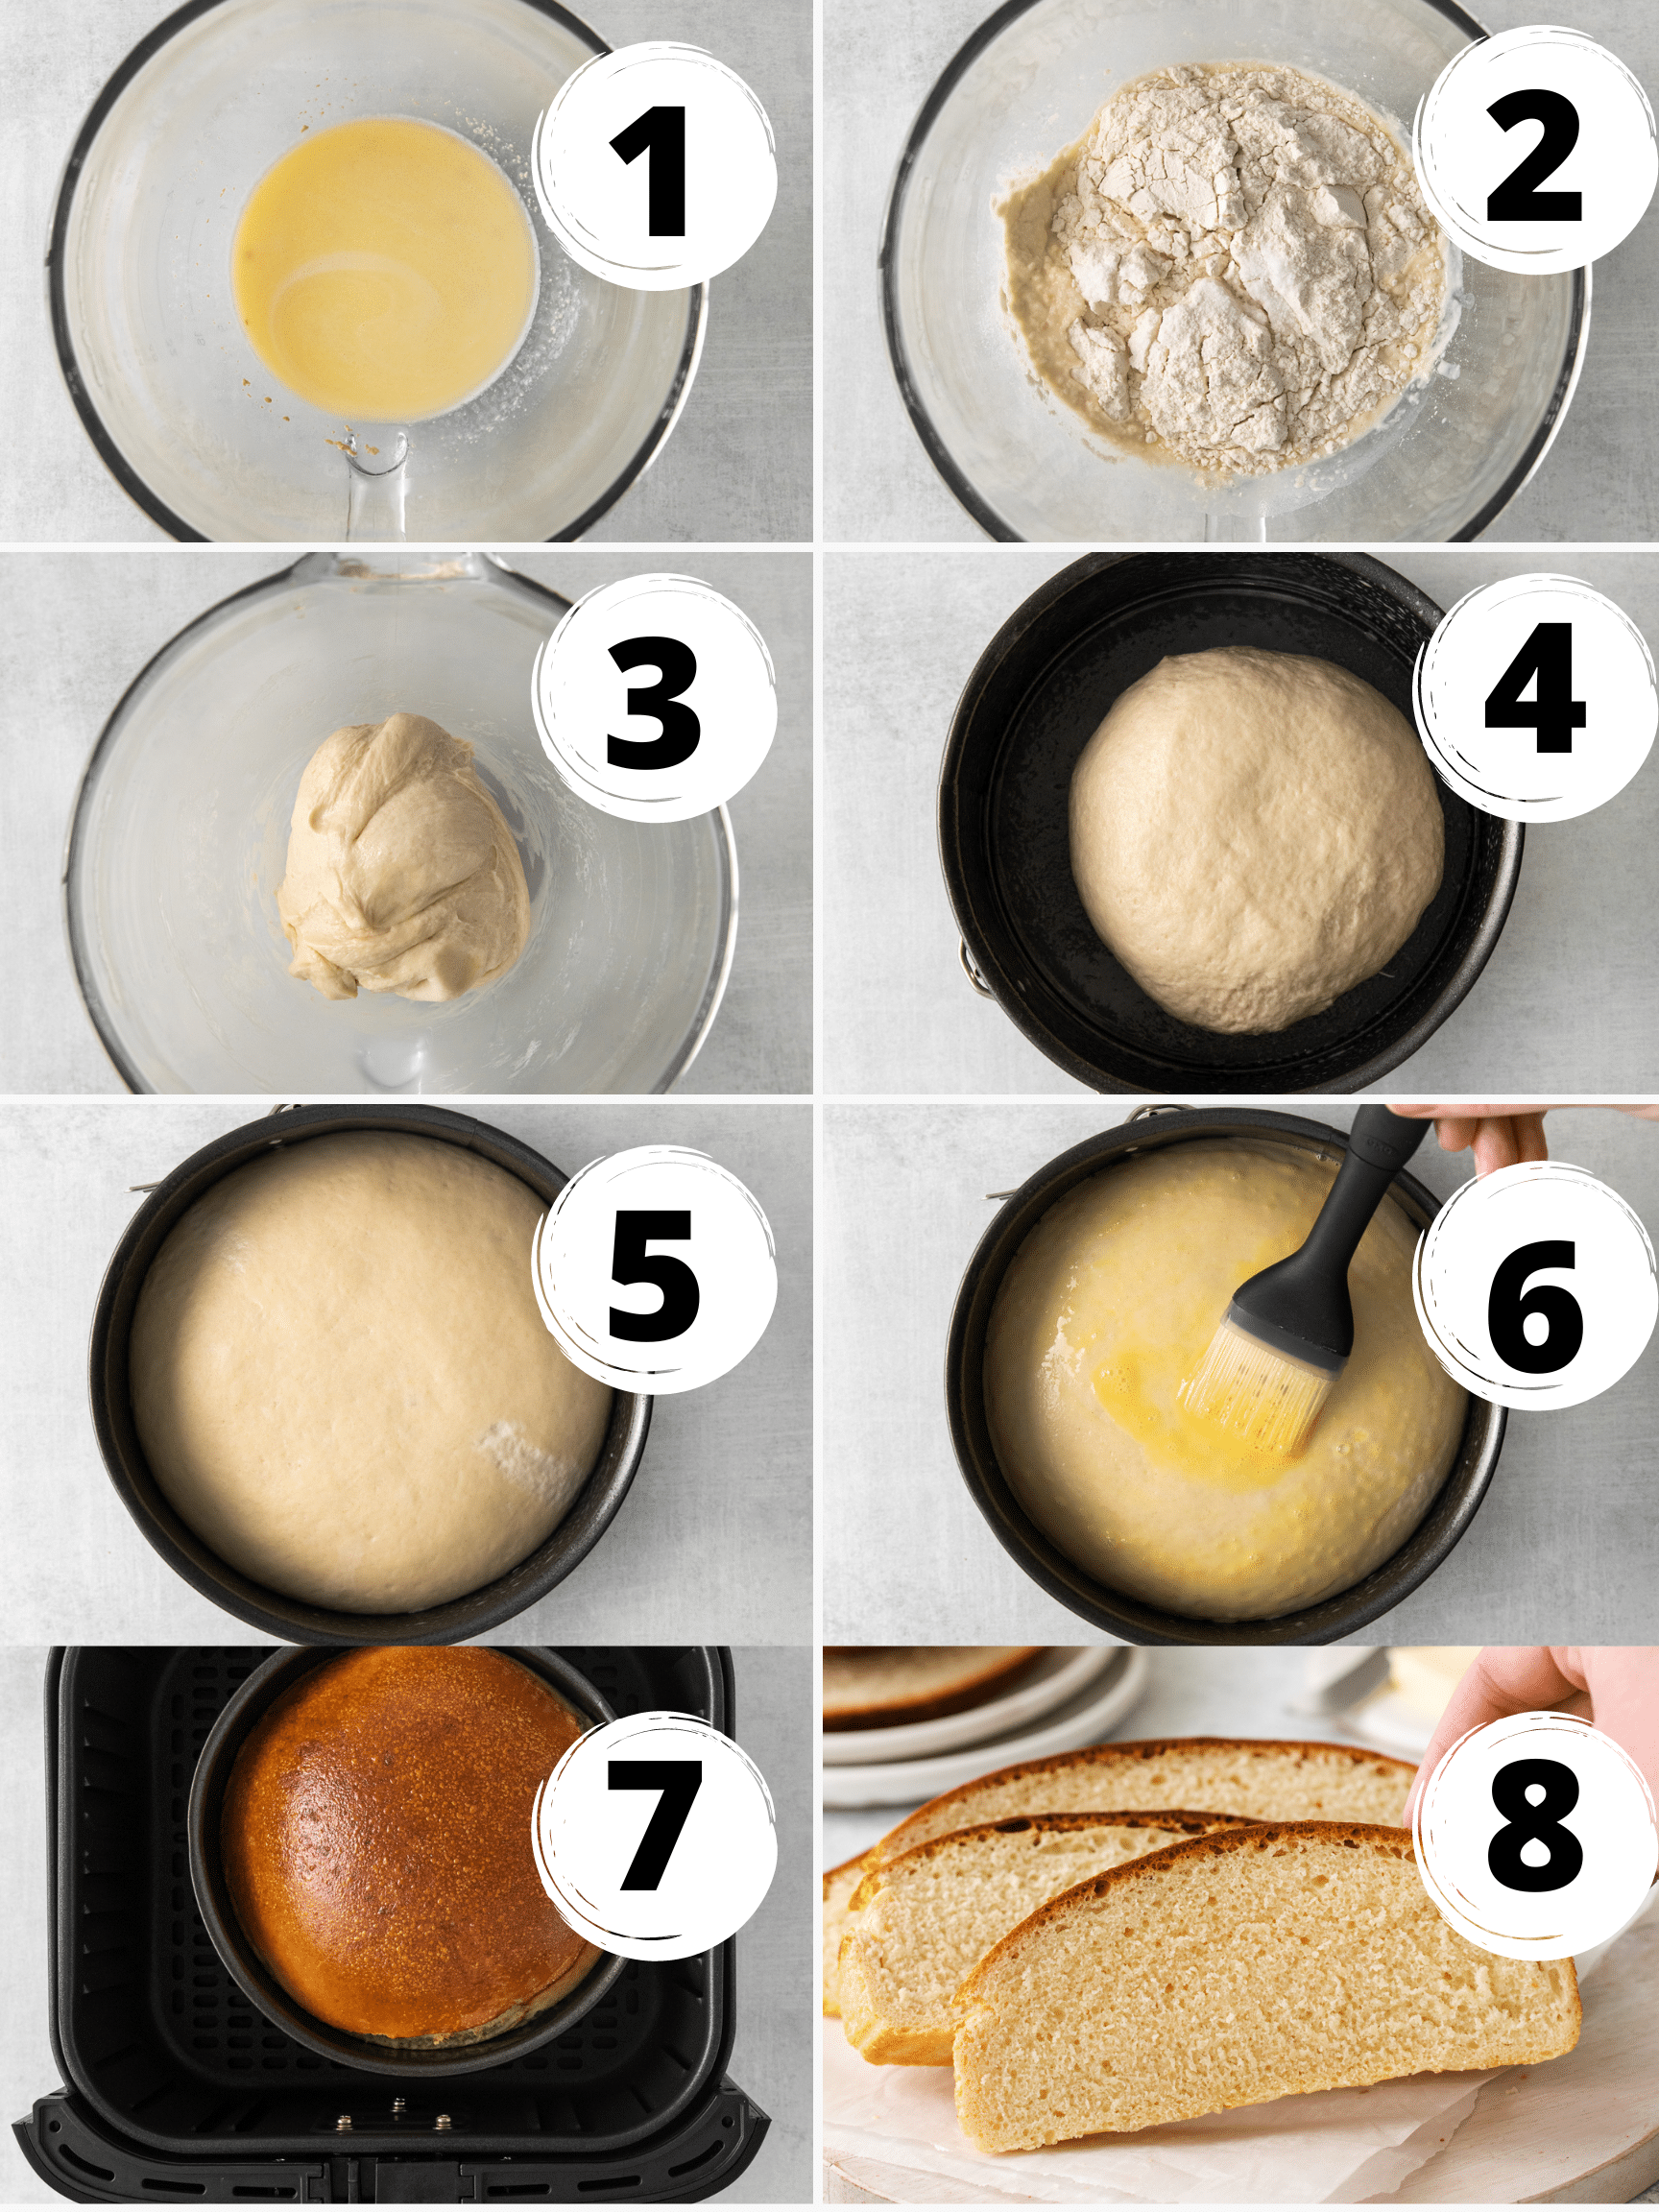 Collage of photos showing the steps to make Air Fryer Bread.